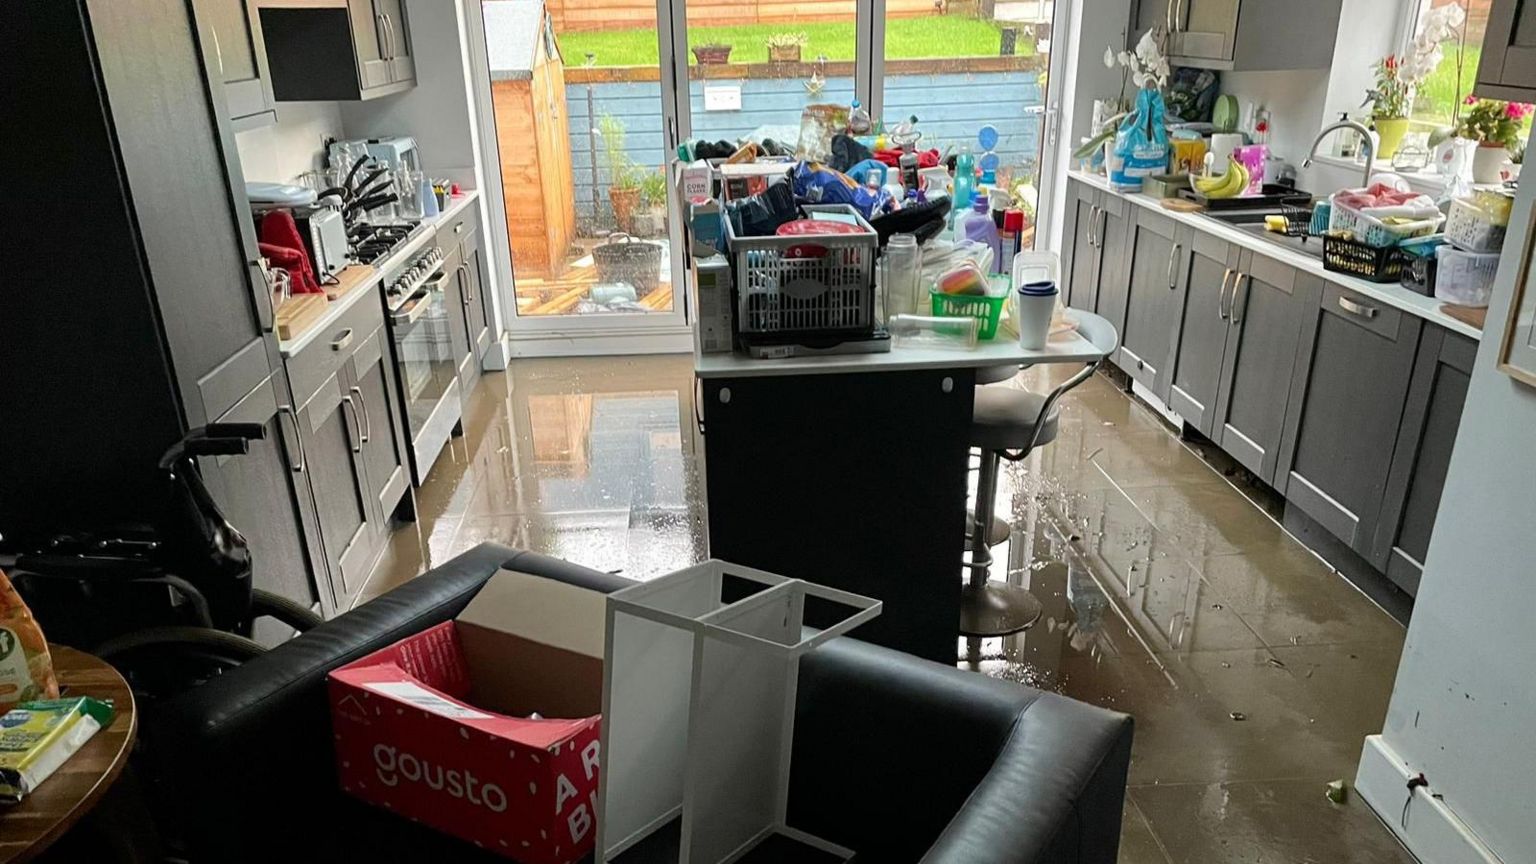 A kitchen floor is covered in water while items are stacked up high on a breakfast bar